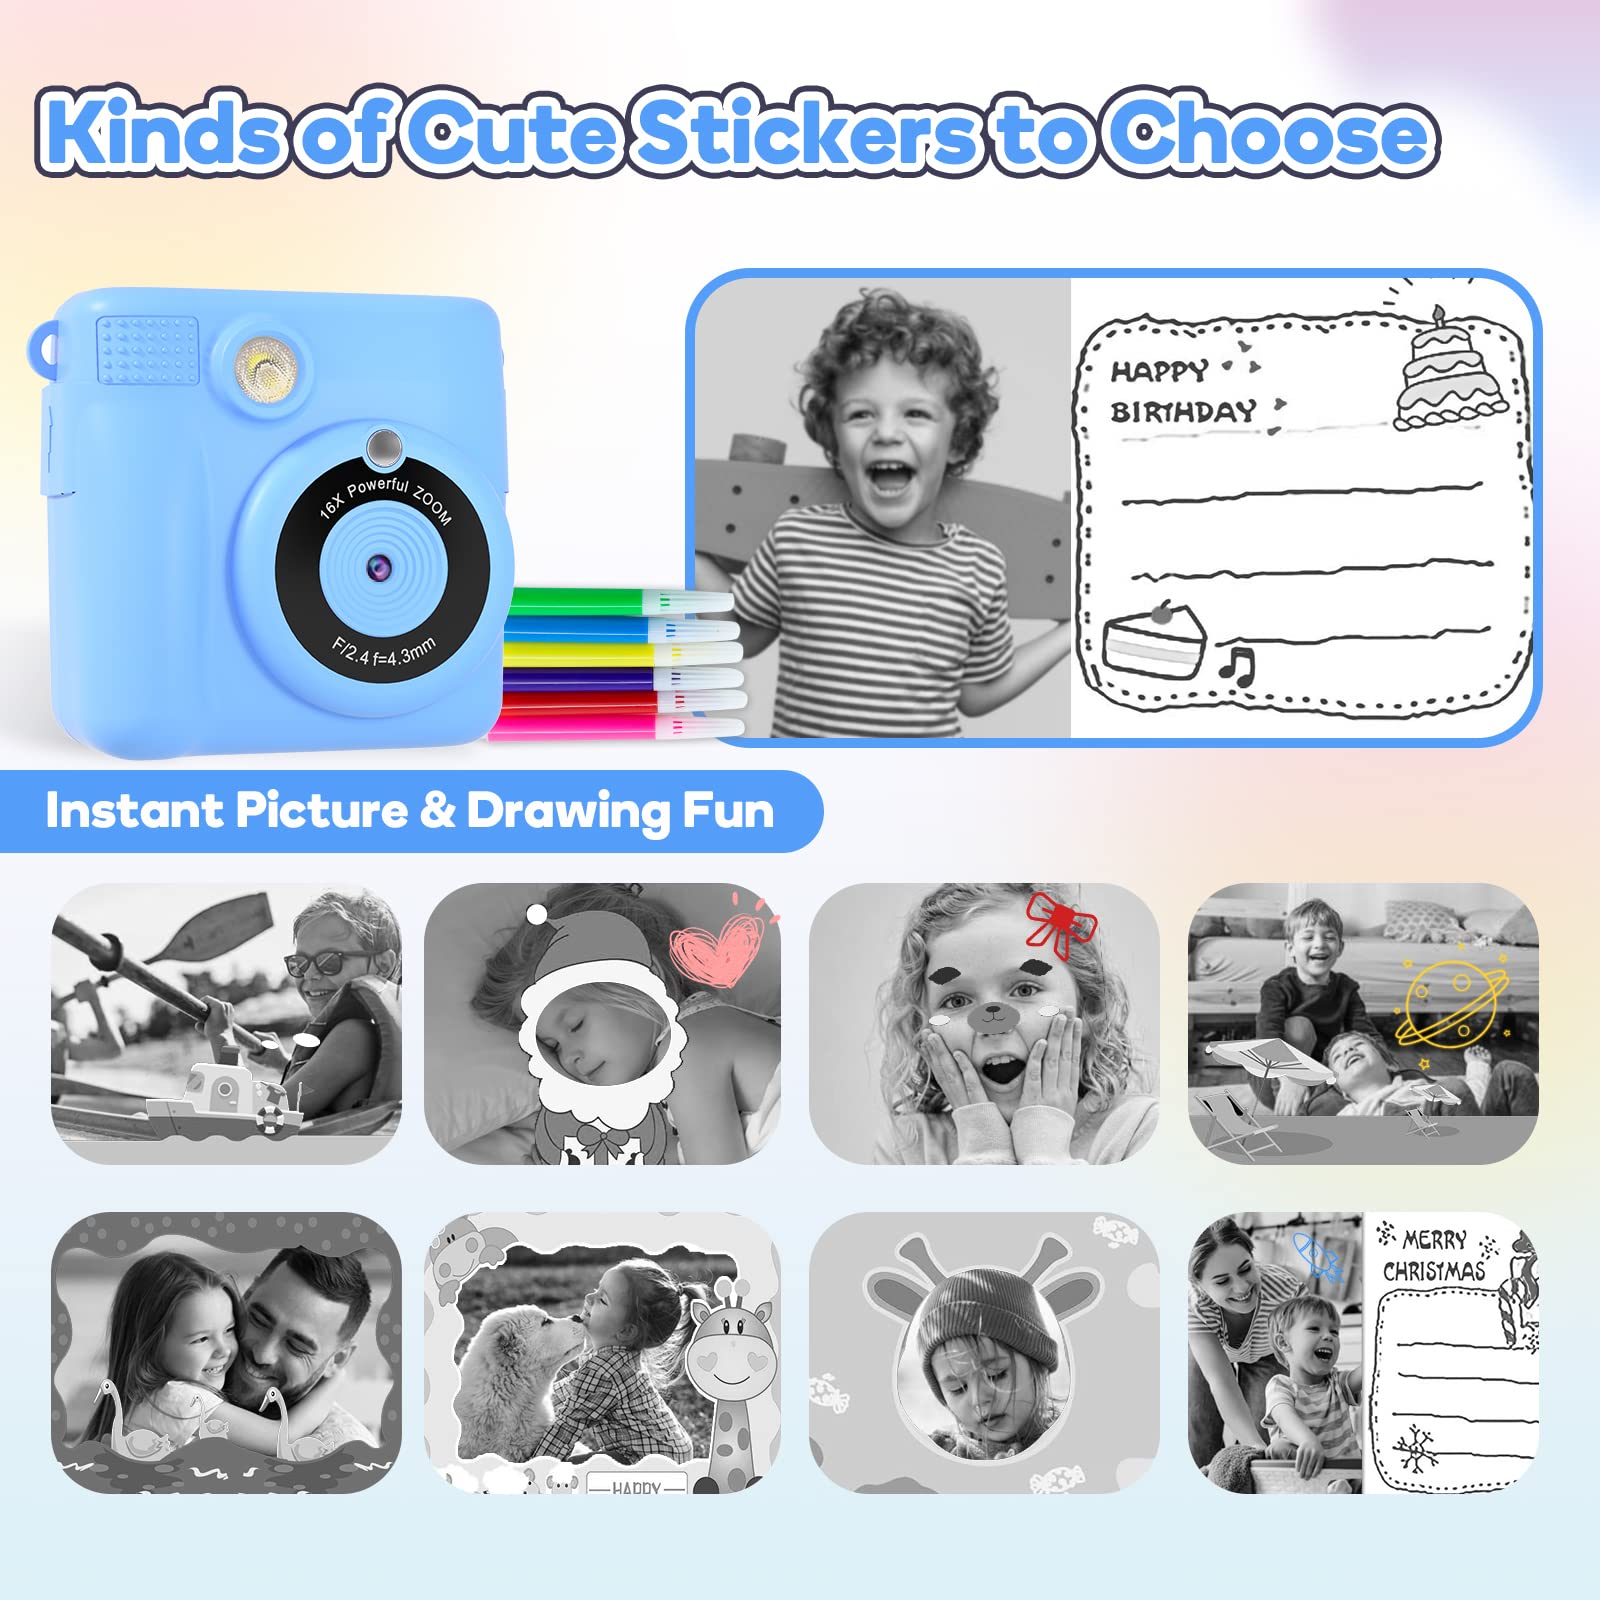 Anchioo Instant Print Camera Toys for Toddlers Age 3-8,Boys and Girls Birthday Gifts with 1080P HD Video Recording,Kids Selfie Digital Camera Electronic Travel Game with Photo Paper 6 Color Pens,Blue